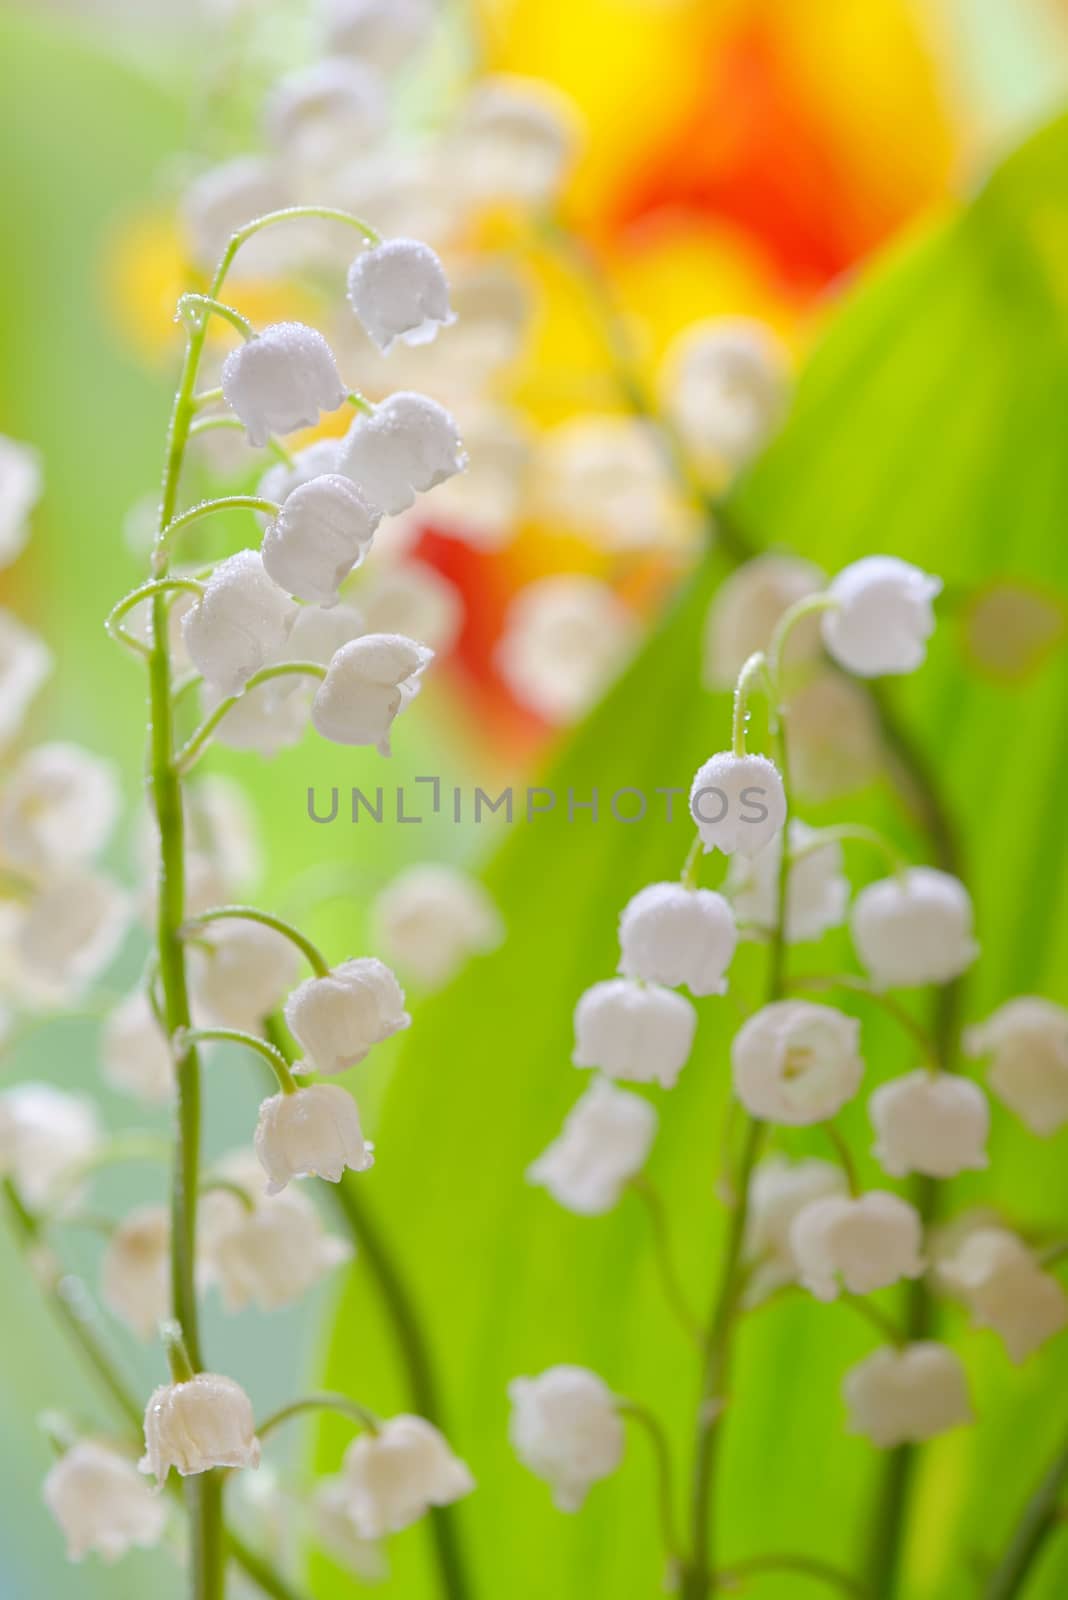 Lily of the valley (convallaria majalis) by jordachelr